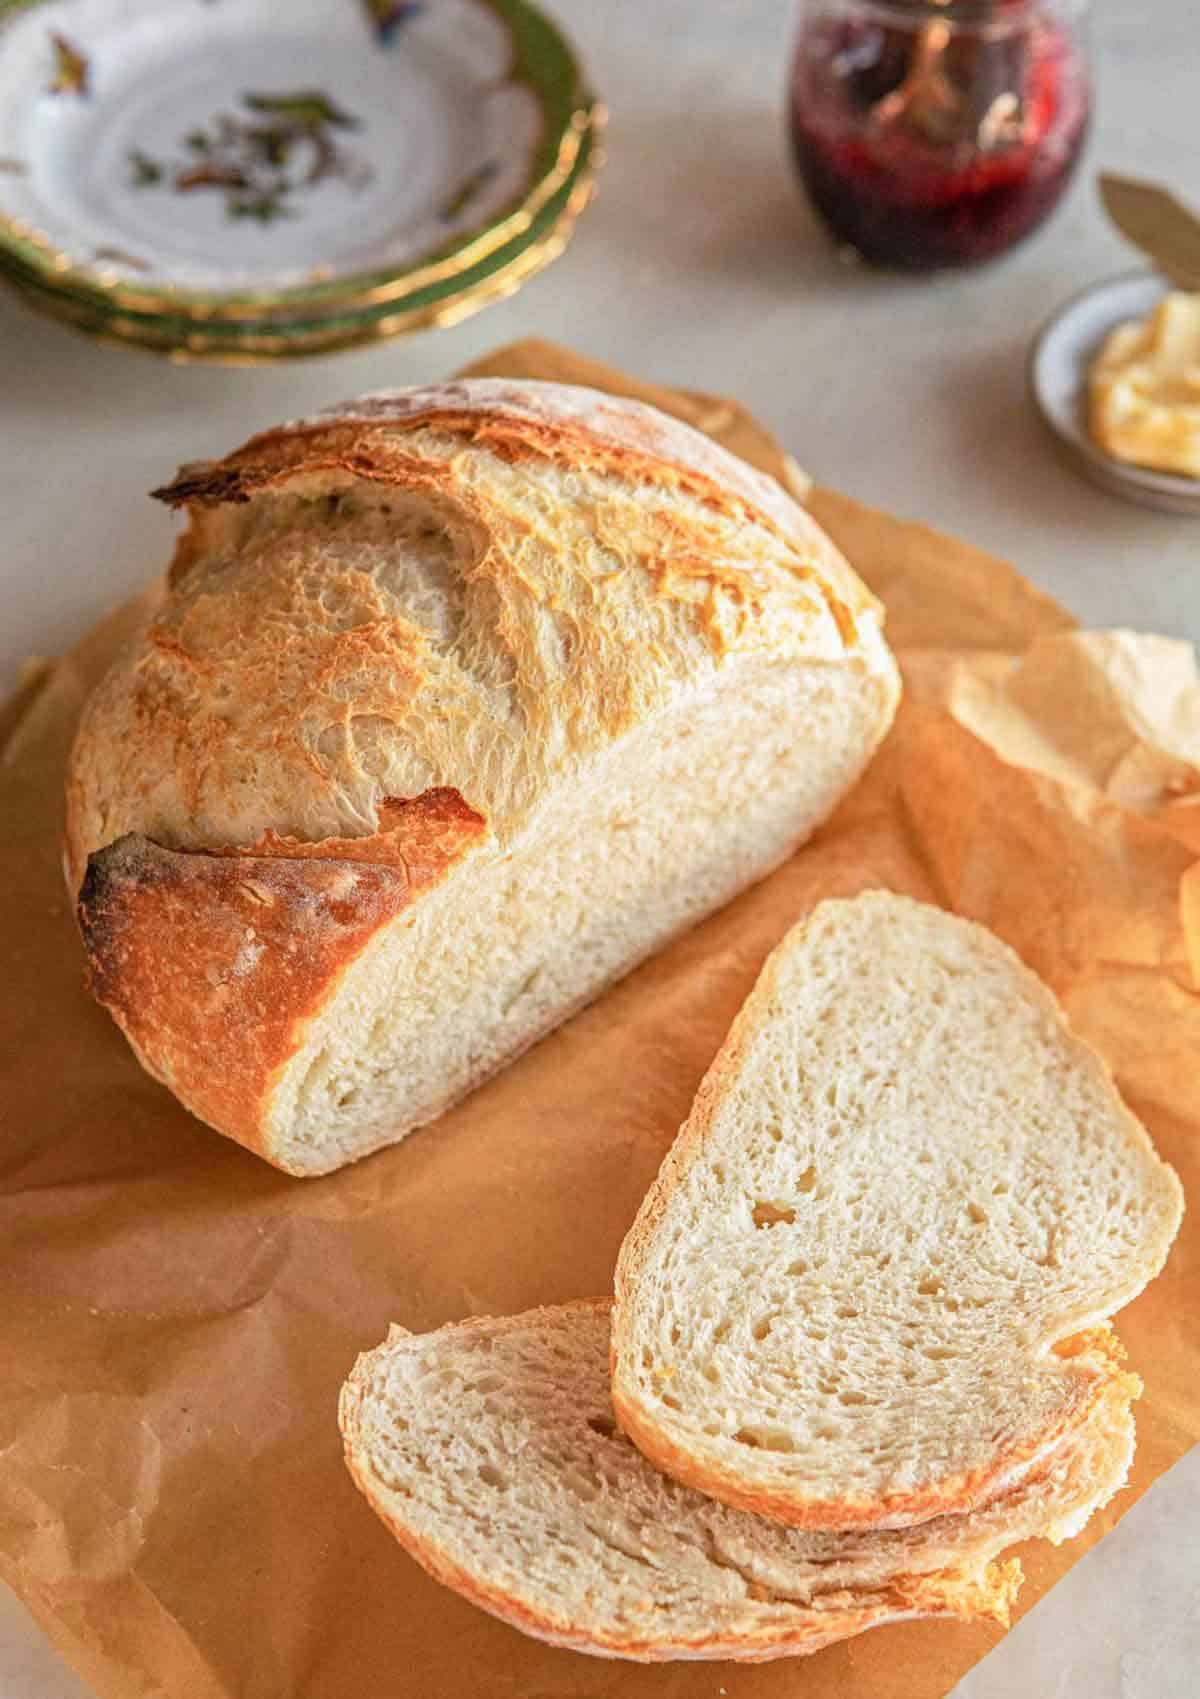 A boule of artisan bread with two slices cut in front.